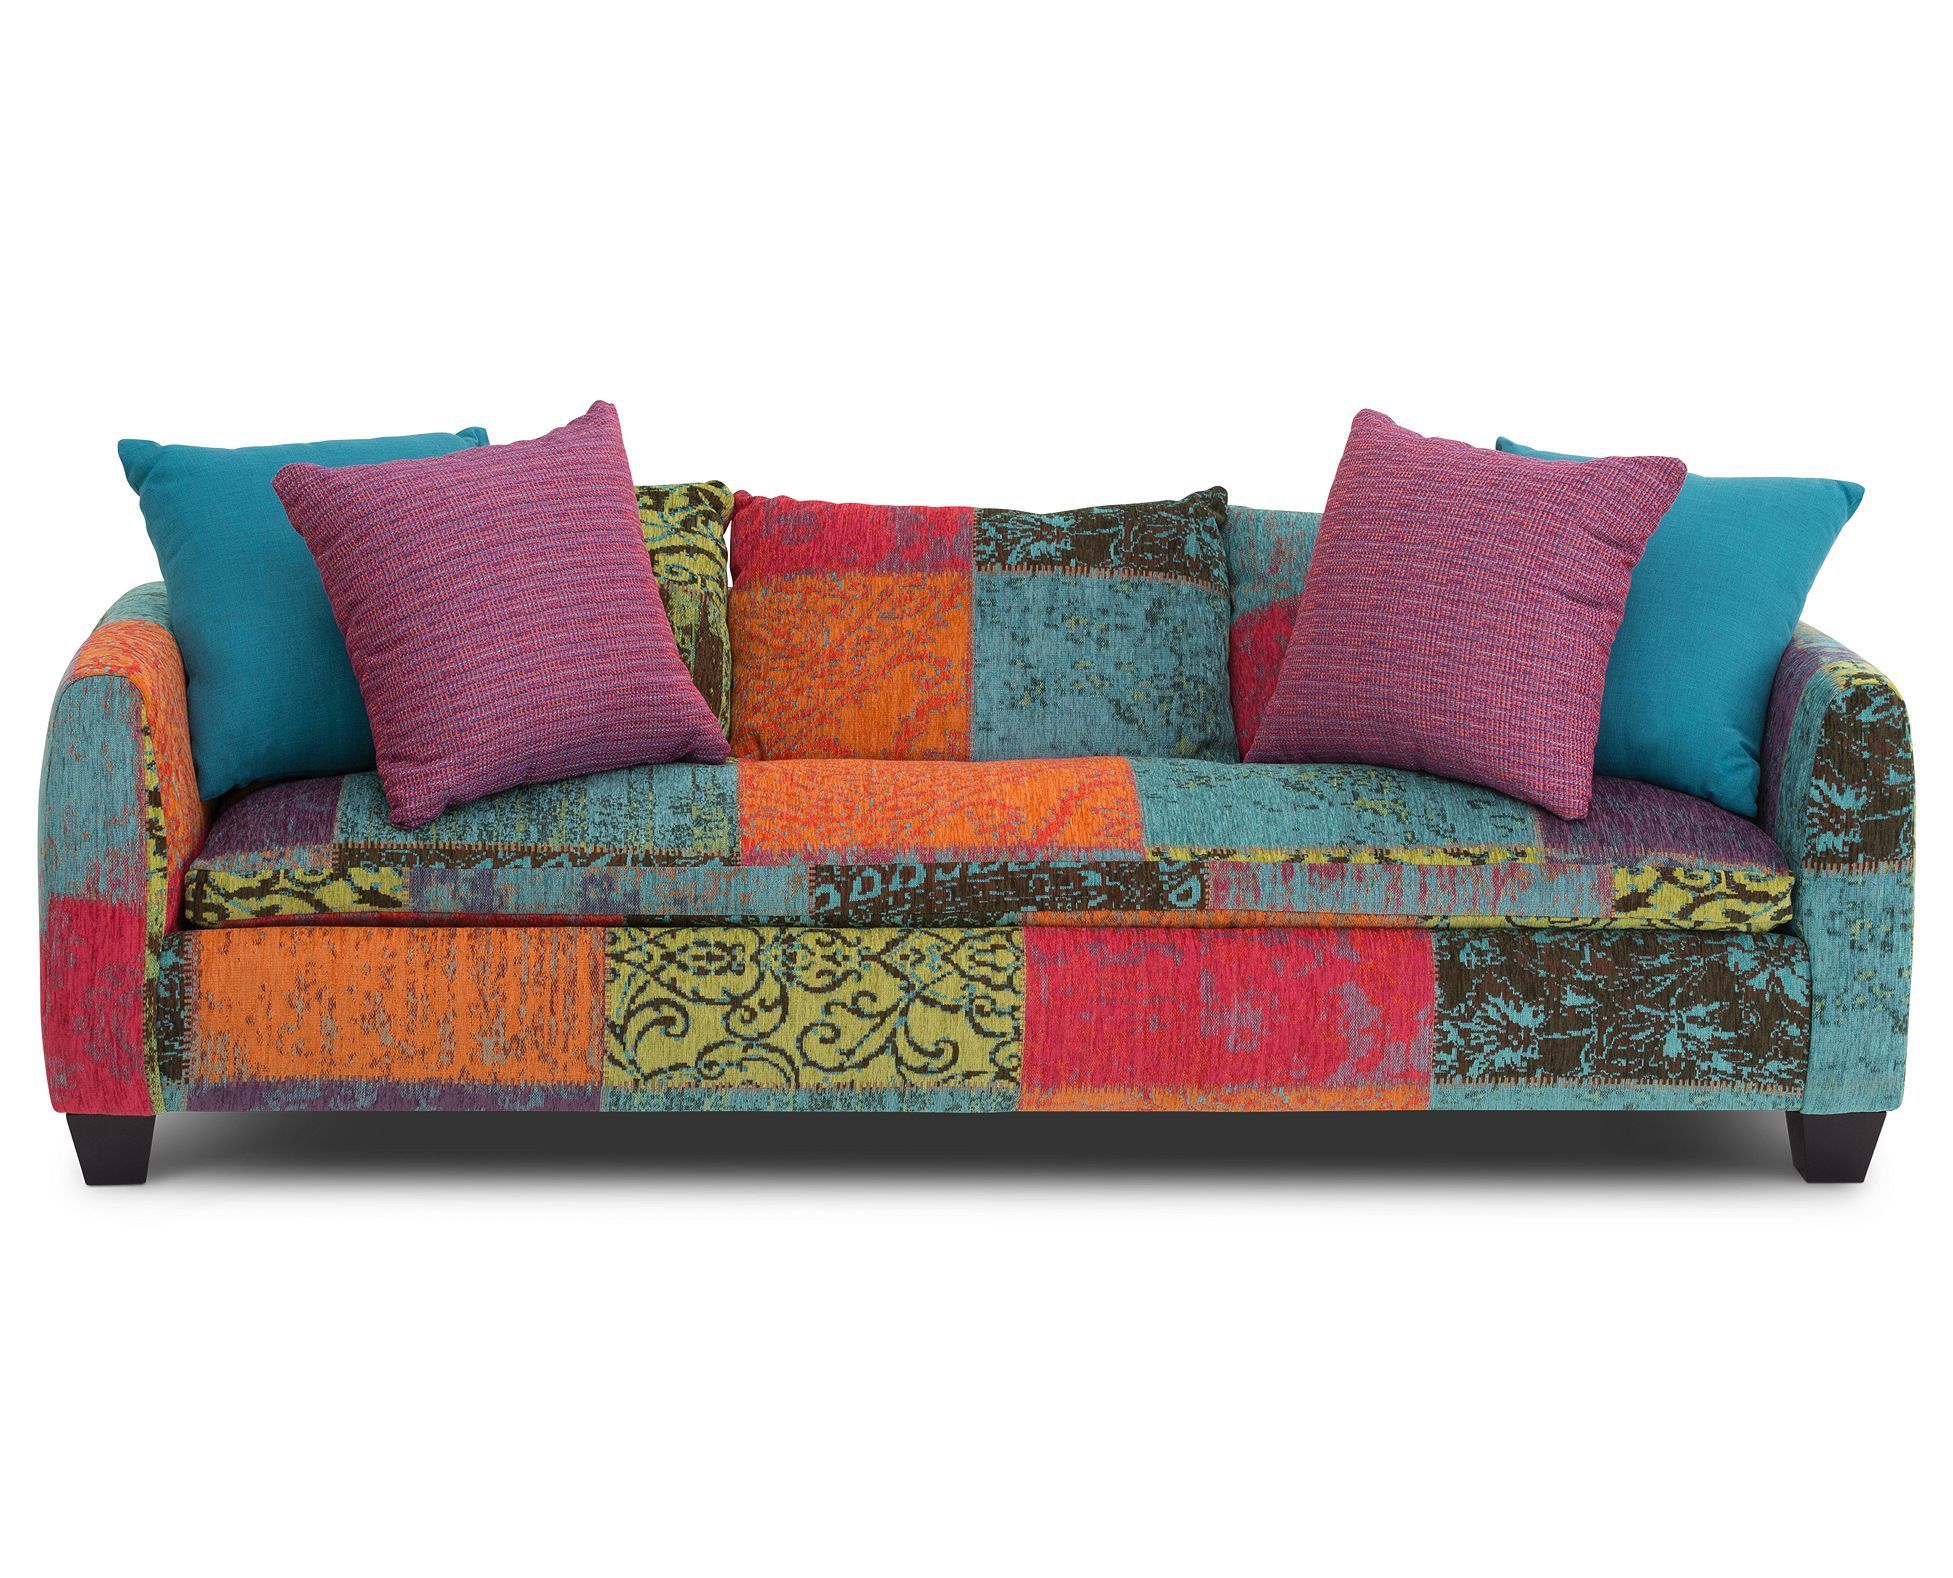 Explore Your Colorful, Creative Side In Your Living Room With The With Regard To Sofas In Multiple Colors (Gallery 1 of 20)